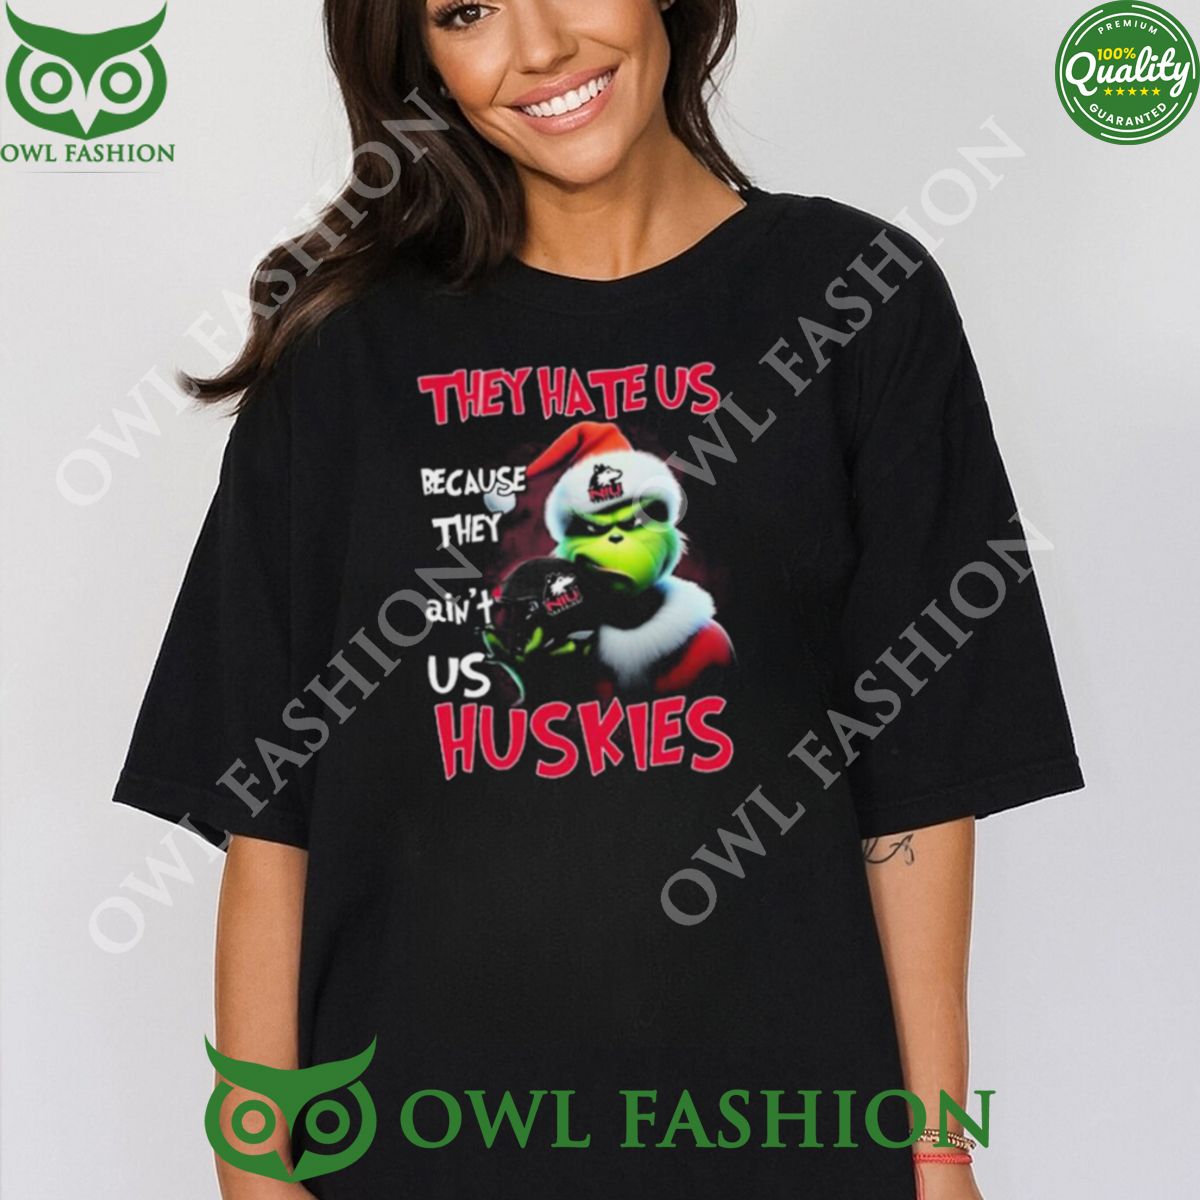 They Hate Us Because Ain’t Us Huskies Santa Grinch Christmas t Shirt